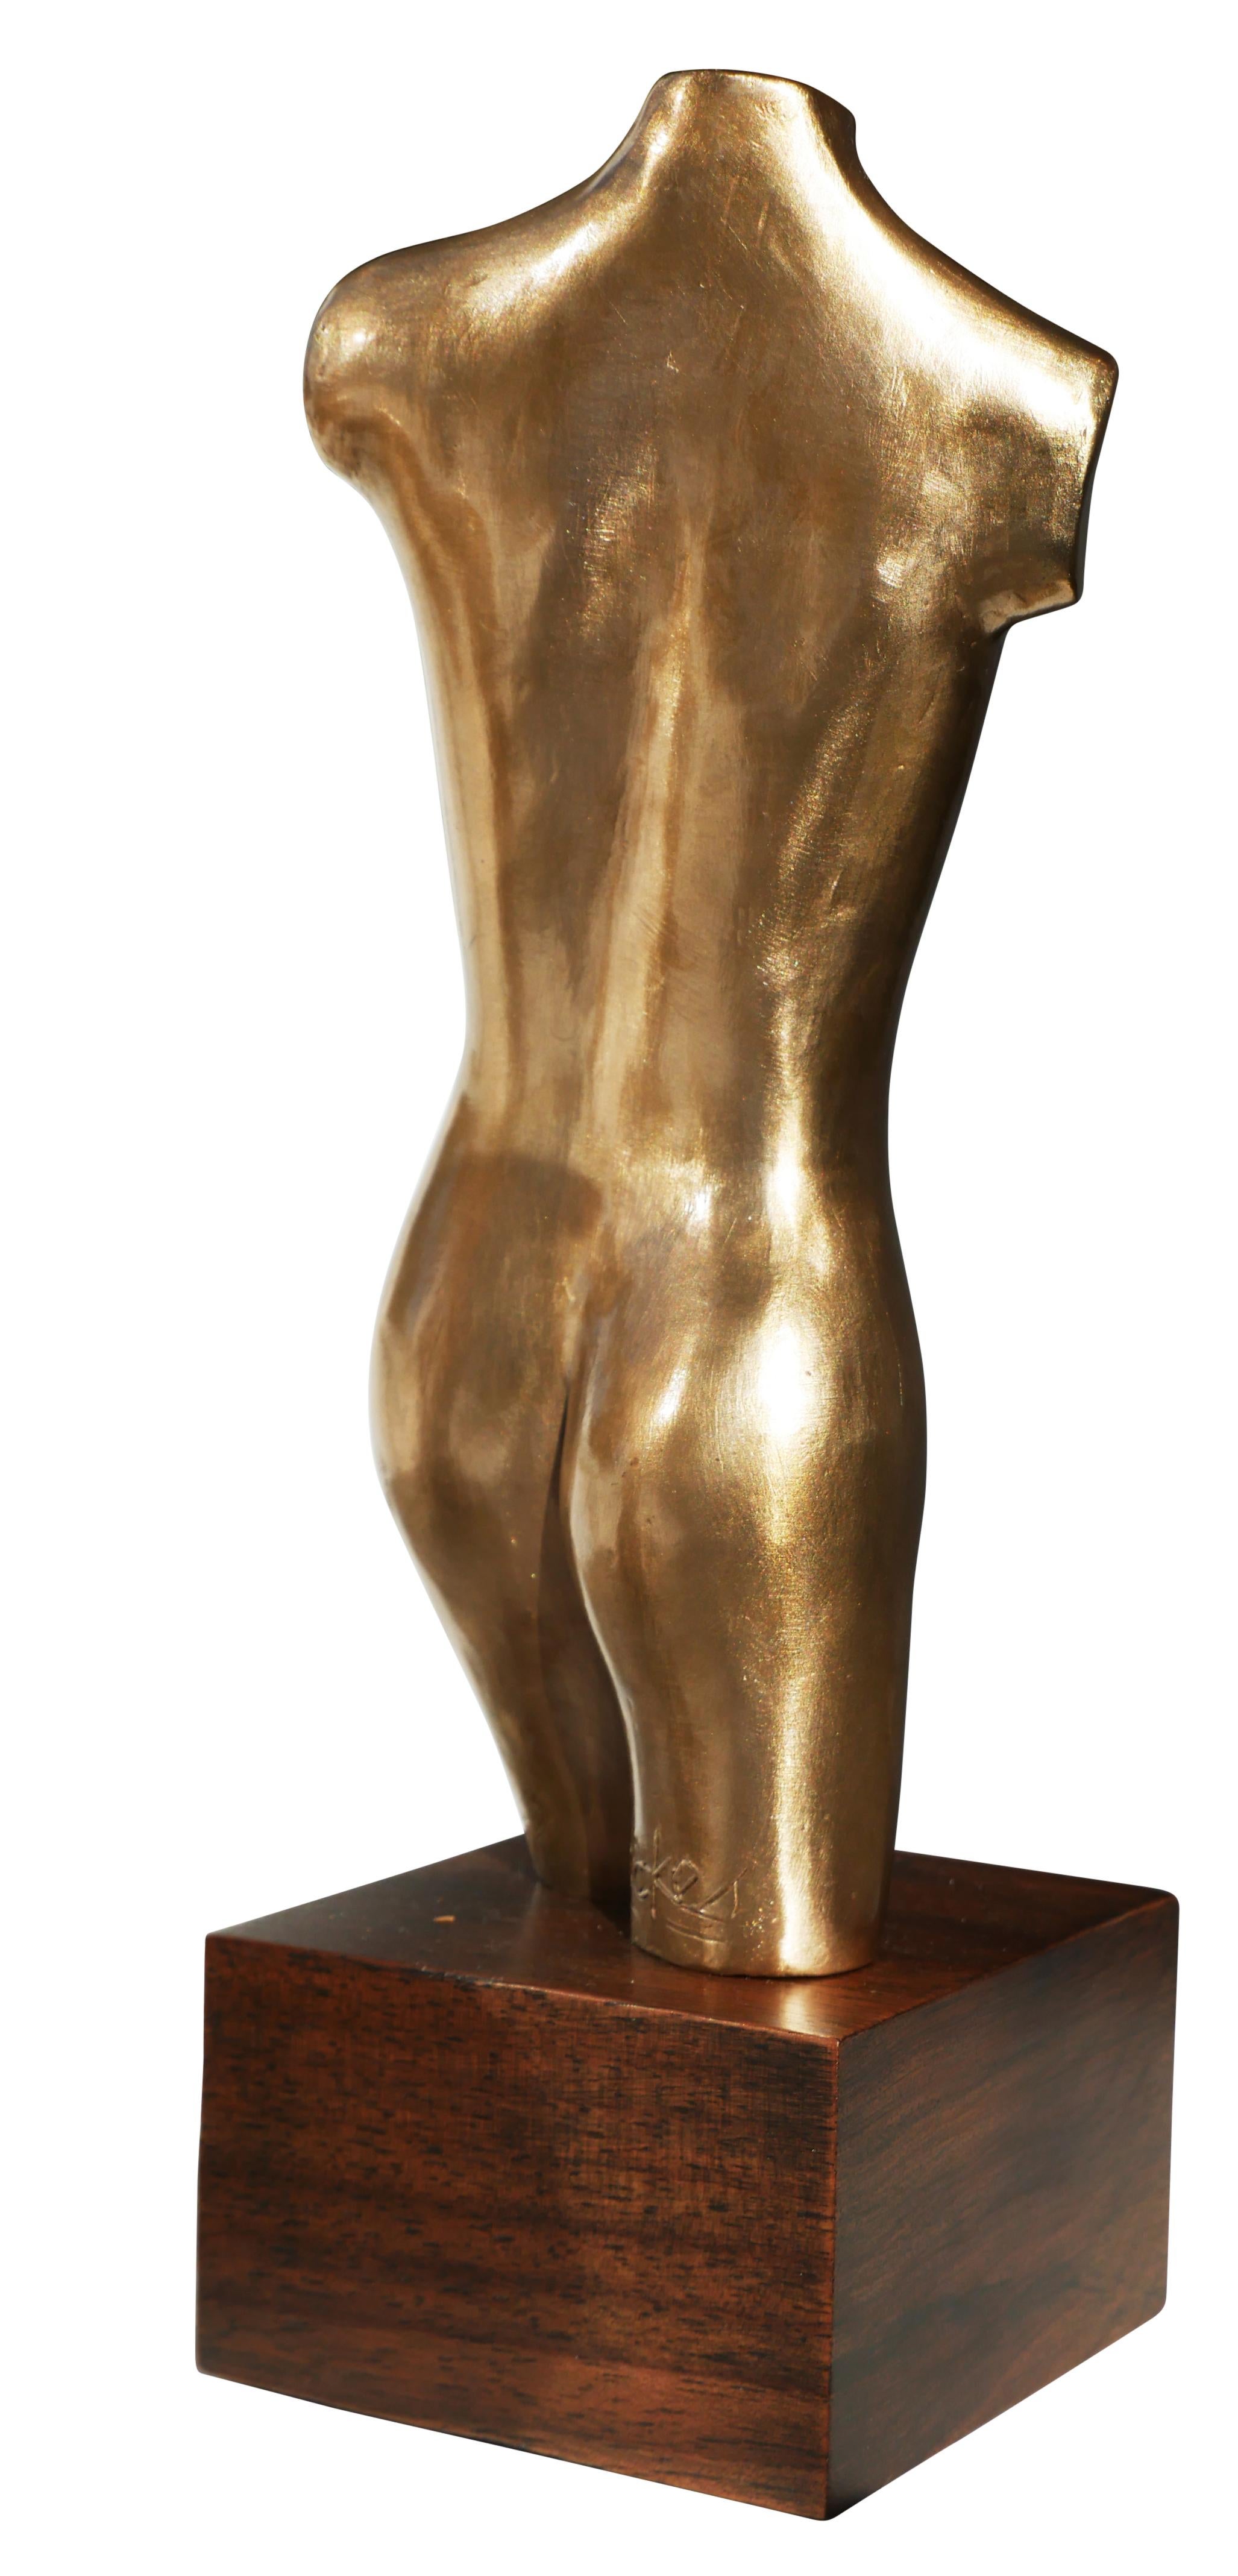 Modernist nude bronze sculpture by Houston, TX artist David Adickes. The sculpture depicts an abstract armless female nude torse that stands on a wooden base. The piece is signed by the artist at the back of the sculpture's left leg. 

Artist